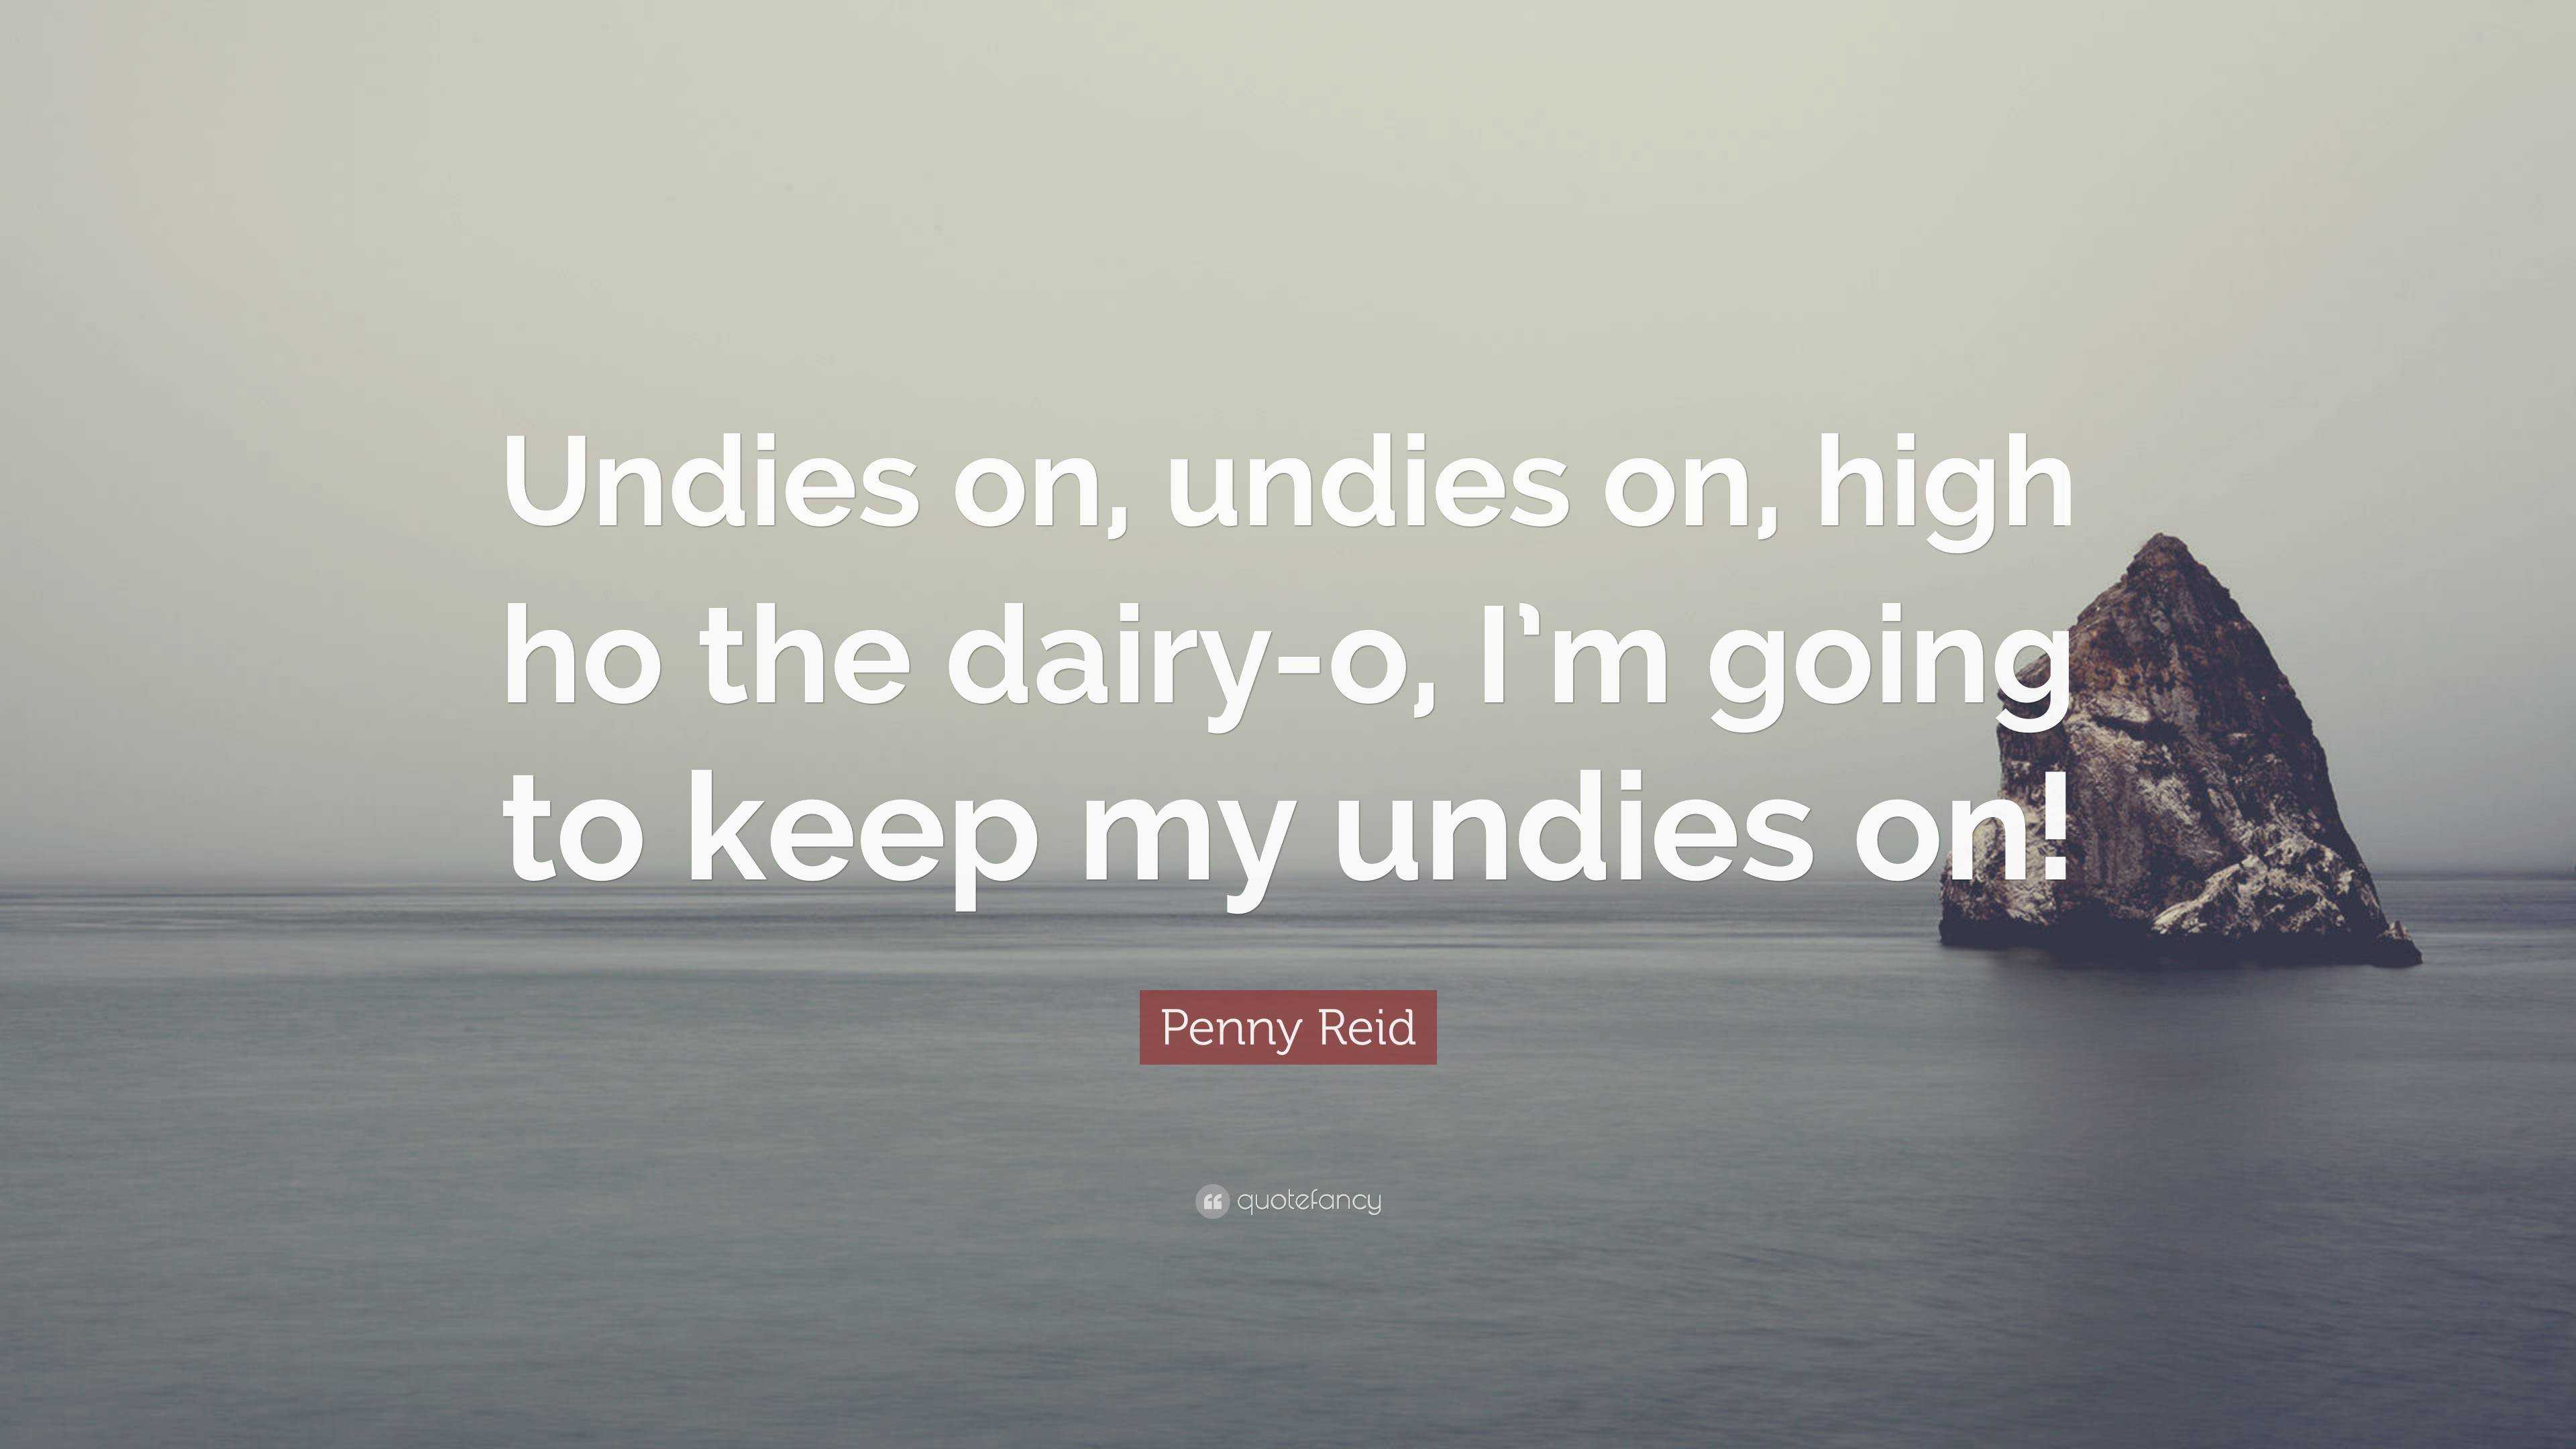 Penny Reid Quote: “Undies on, undies on, high ho the dairy-o, I'm